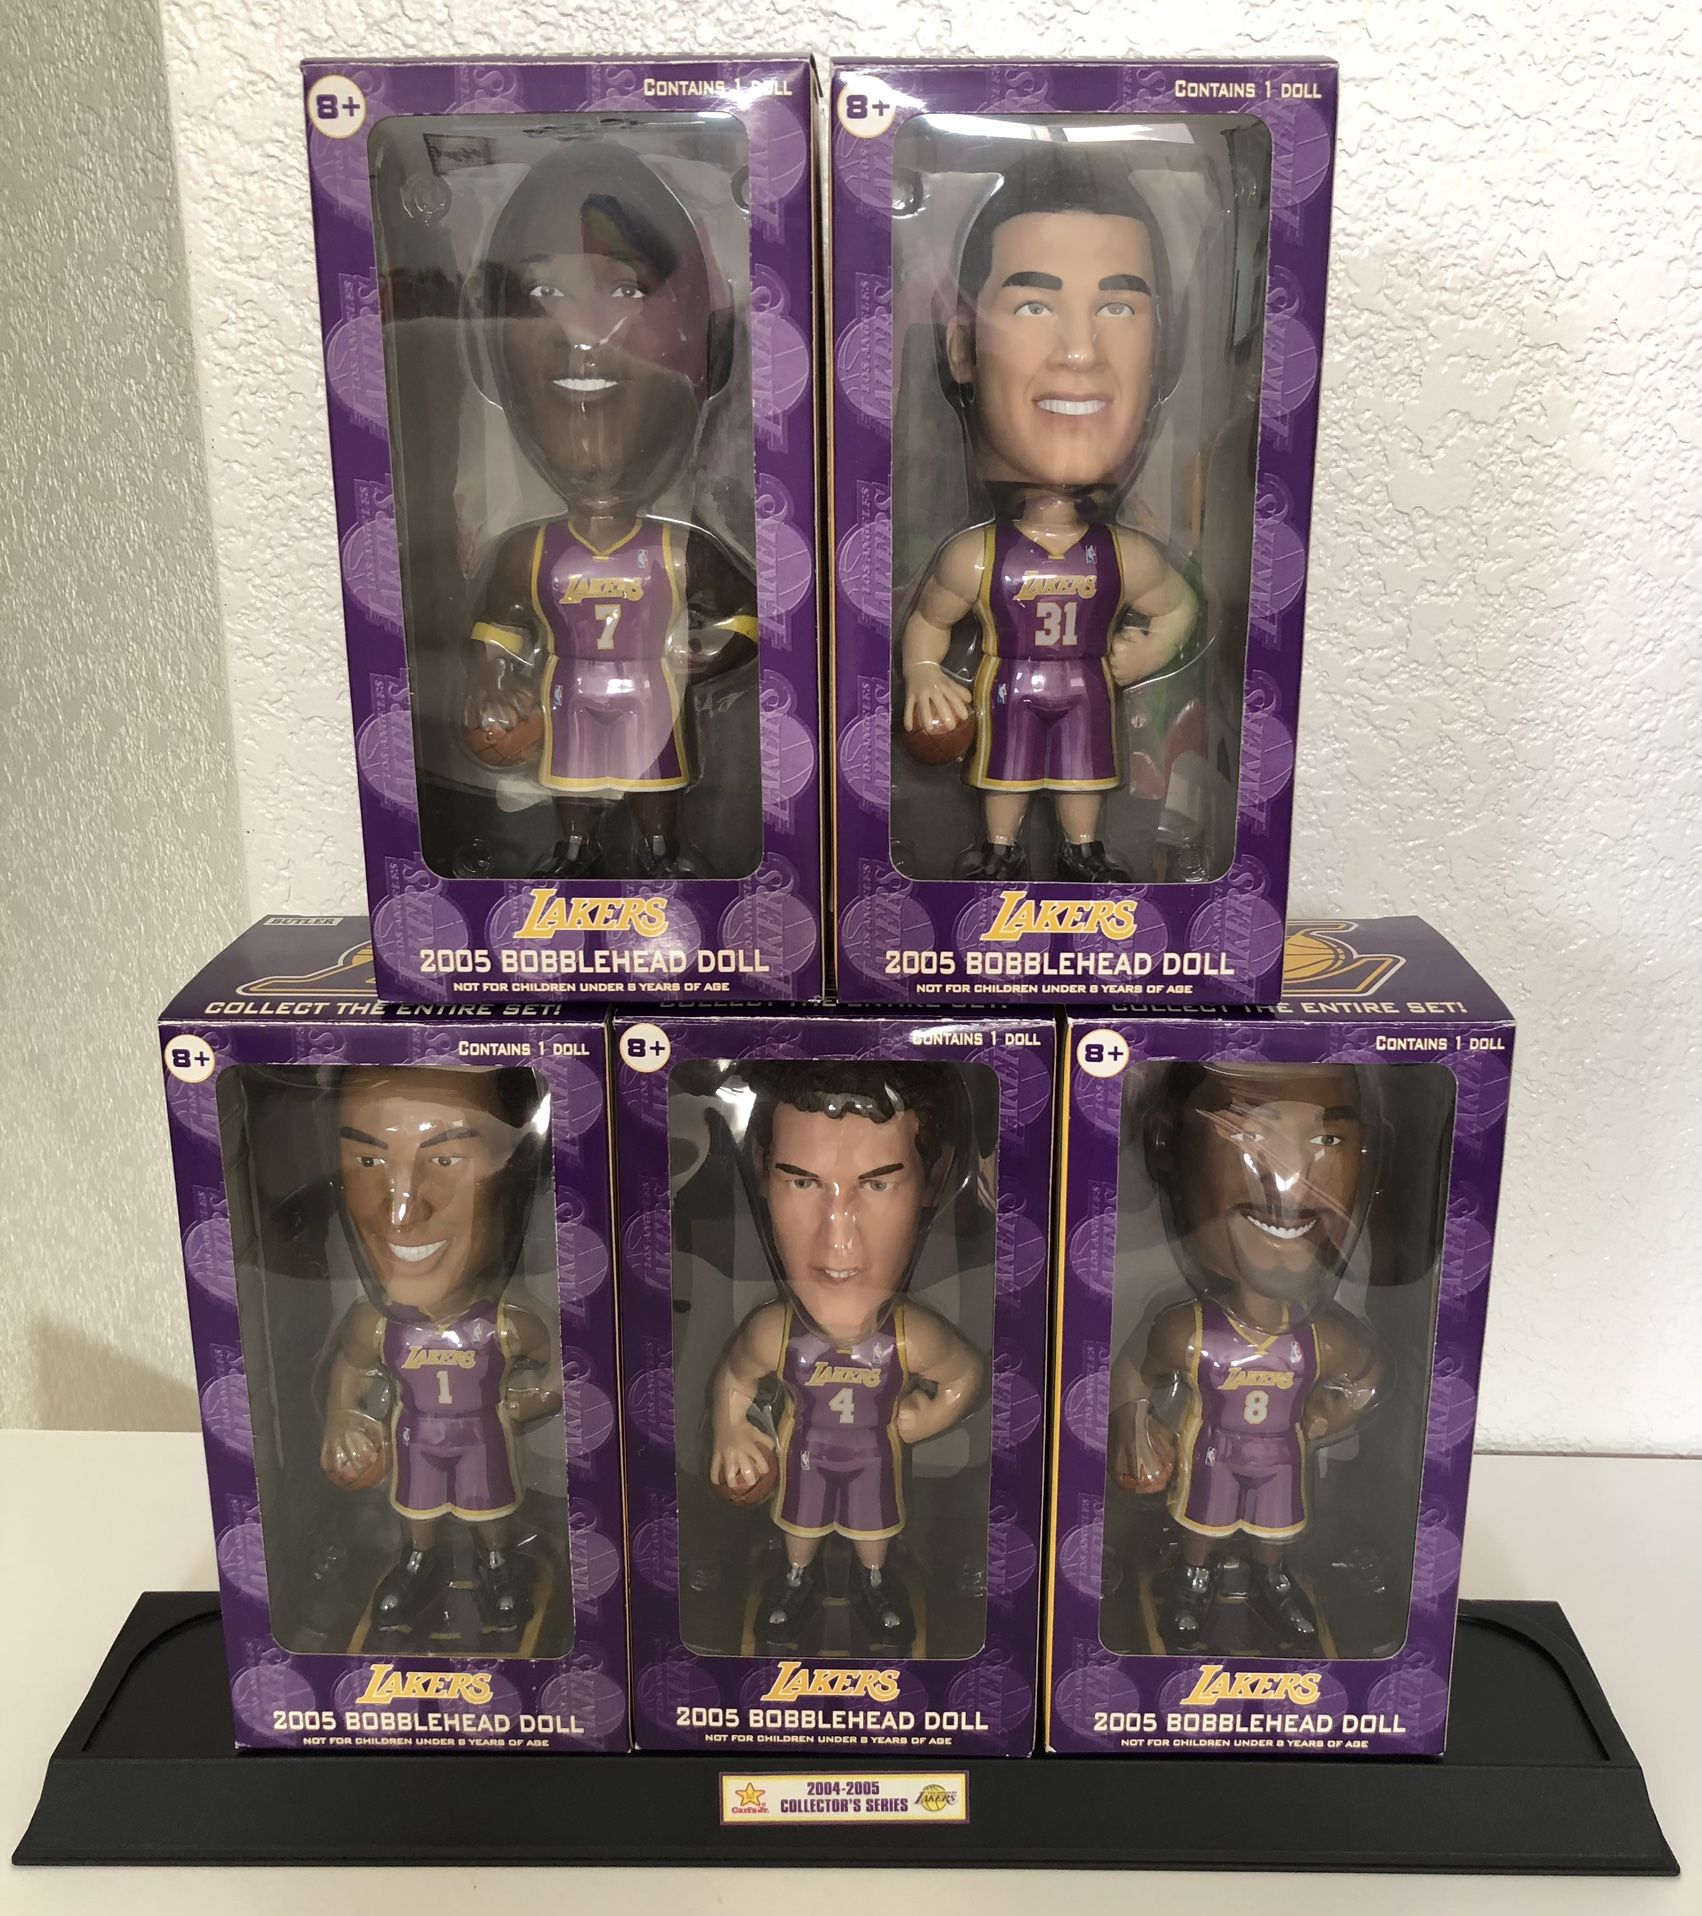 LAKERS 2005 Bobbleheads With Display Stand / Carl’s Jr. Bobbleheads / Includes Kobe ($125 For Set)